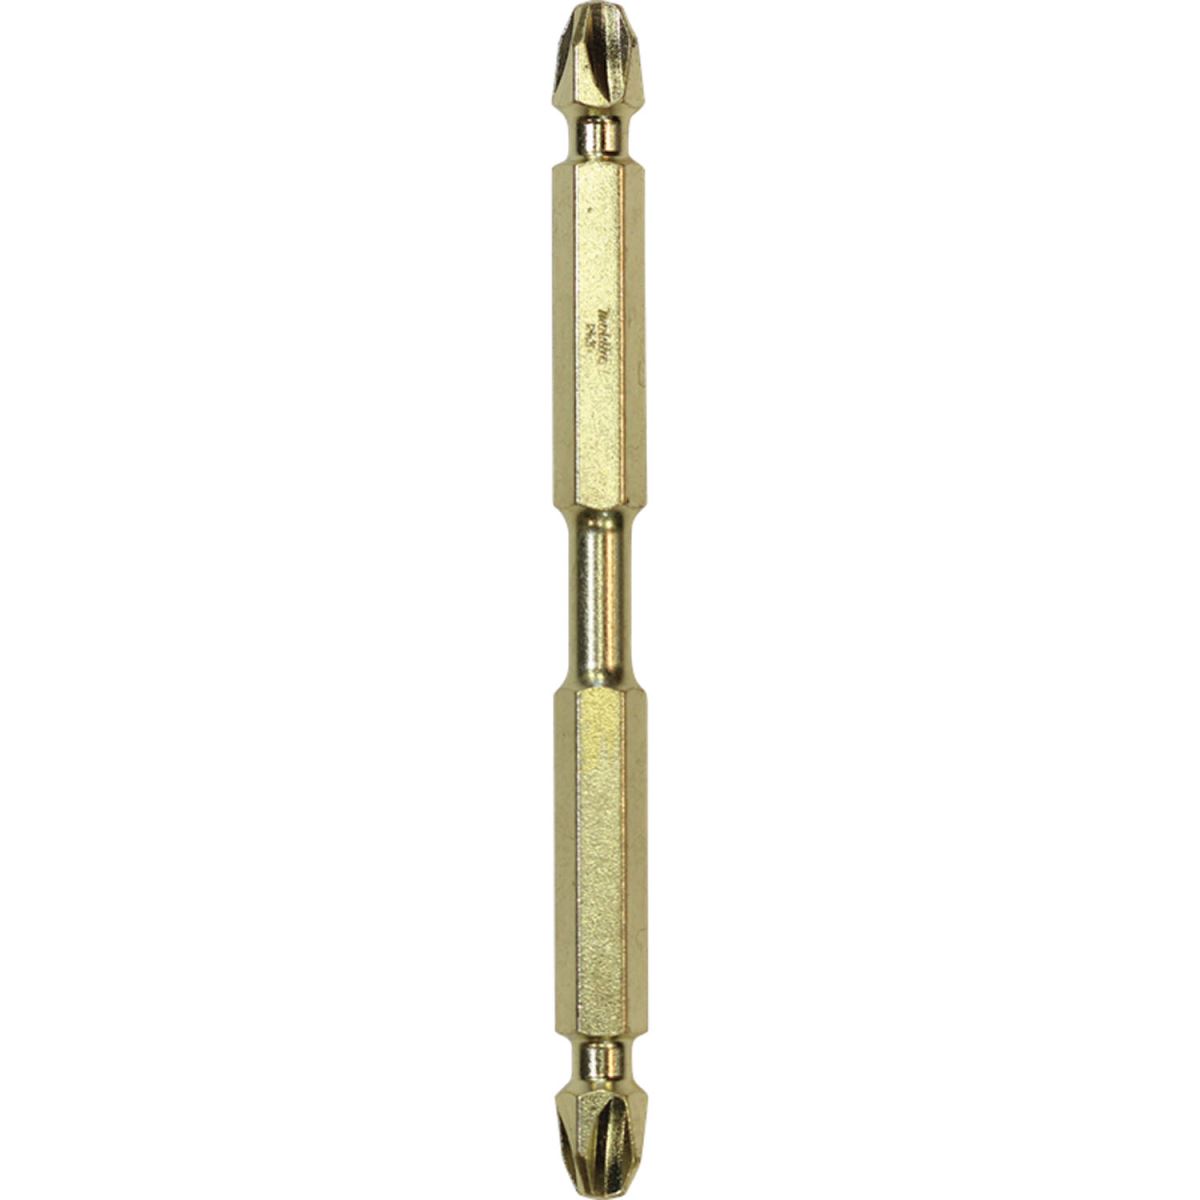 IMPACT GOLD #3 3-1/2 IN. PHILLIPS DOUBLE ENDED POWER BIT